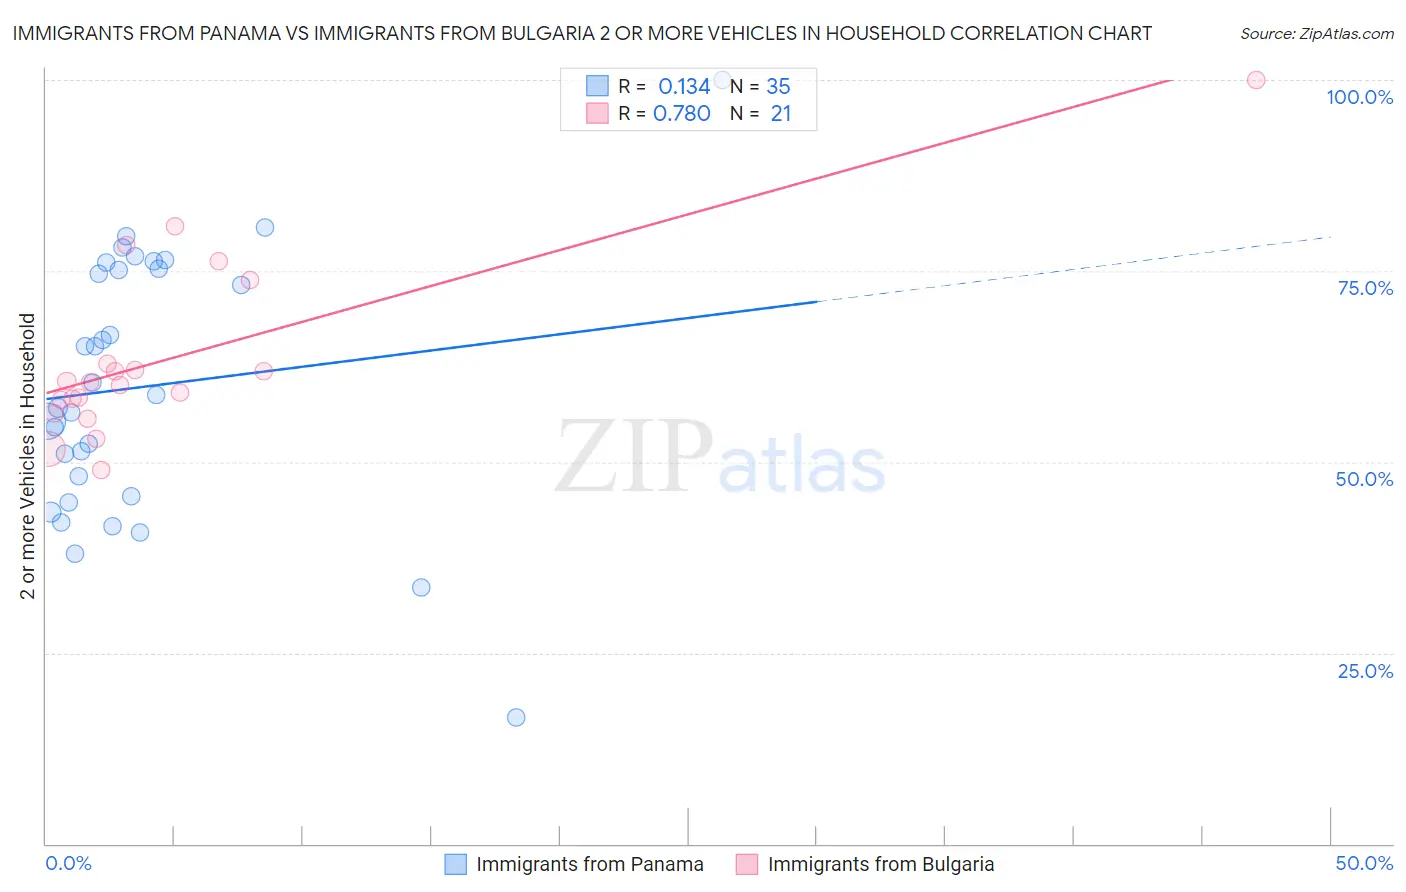 Immigrants from Panama vs Immigrants from Bulgaria 2 or more Vehicles in Household